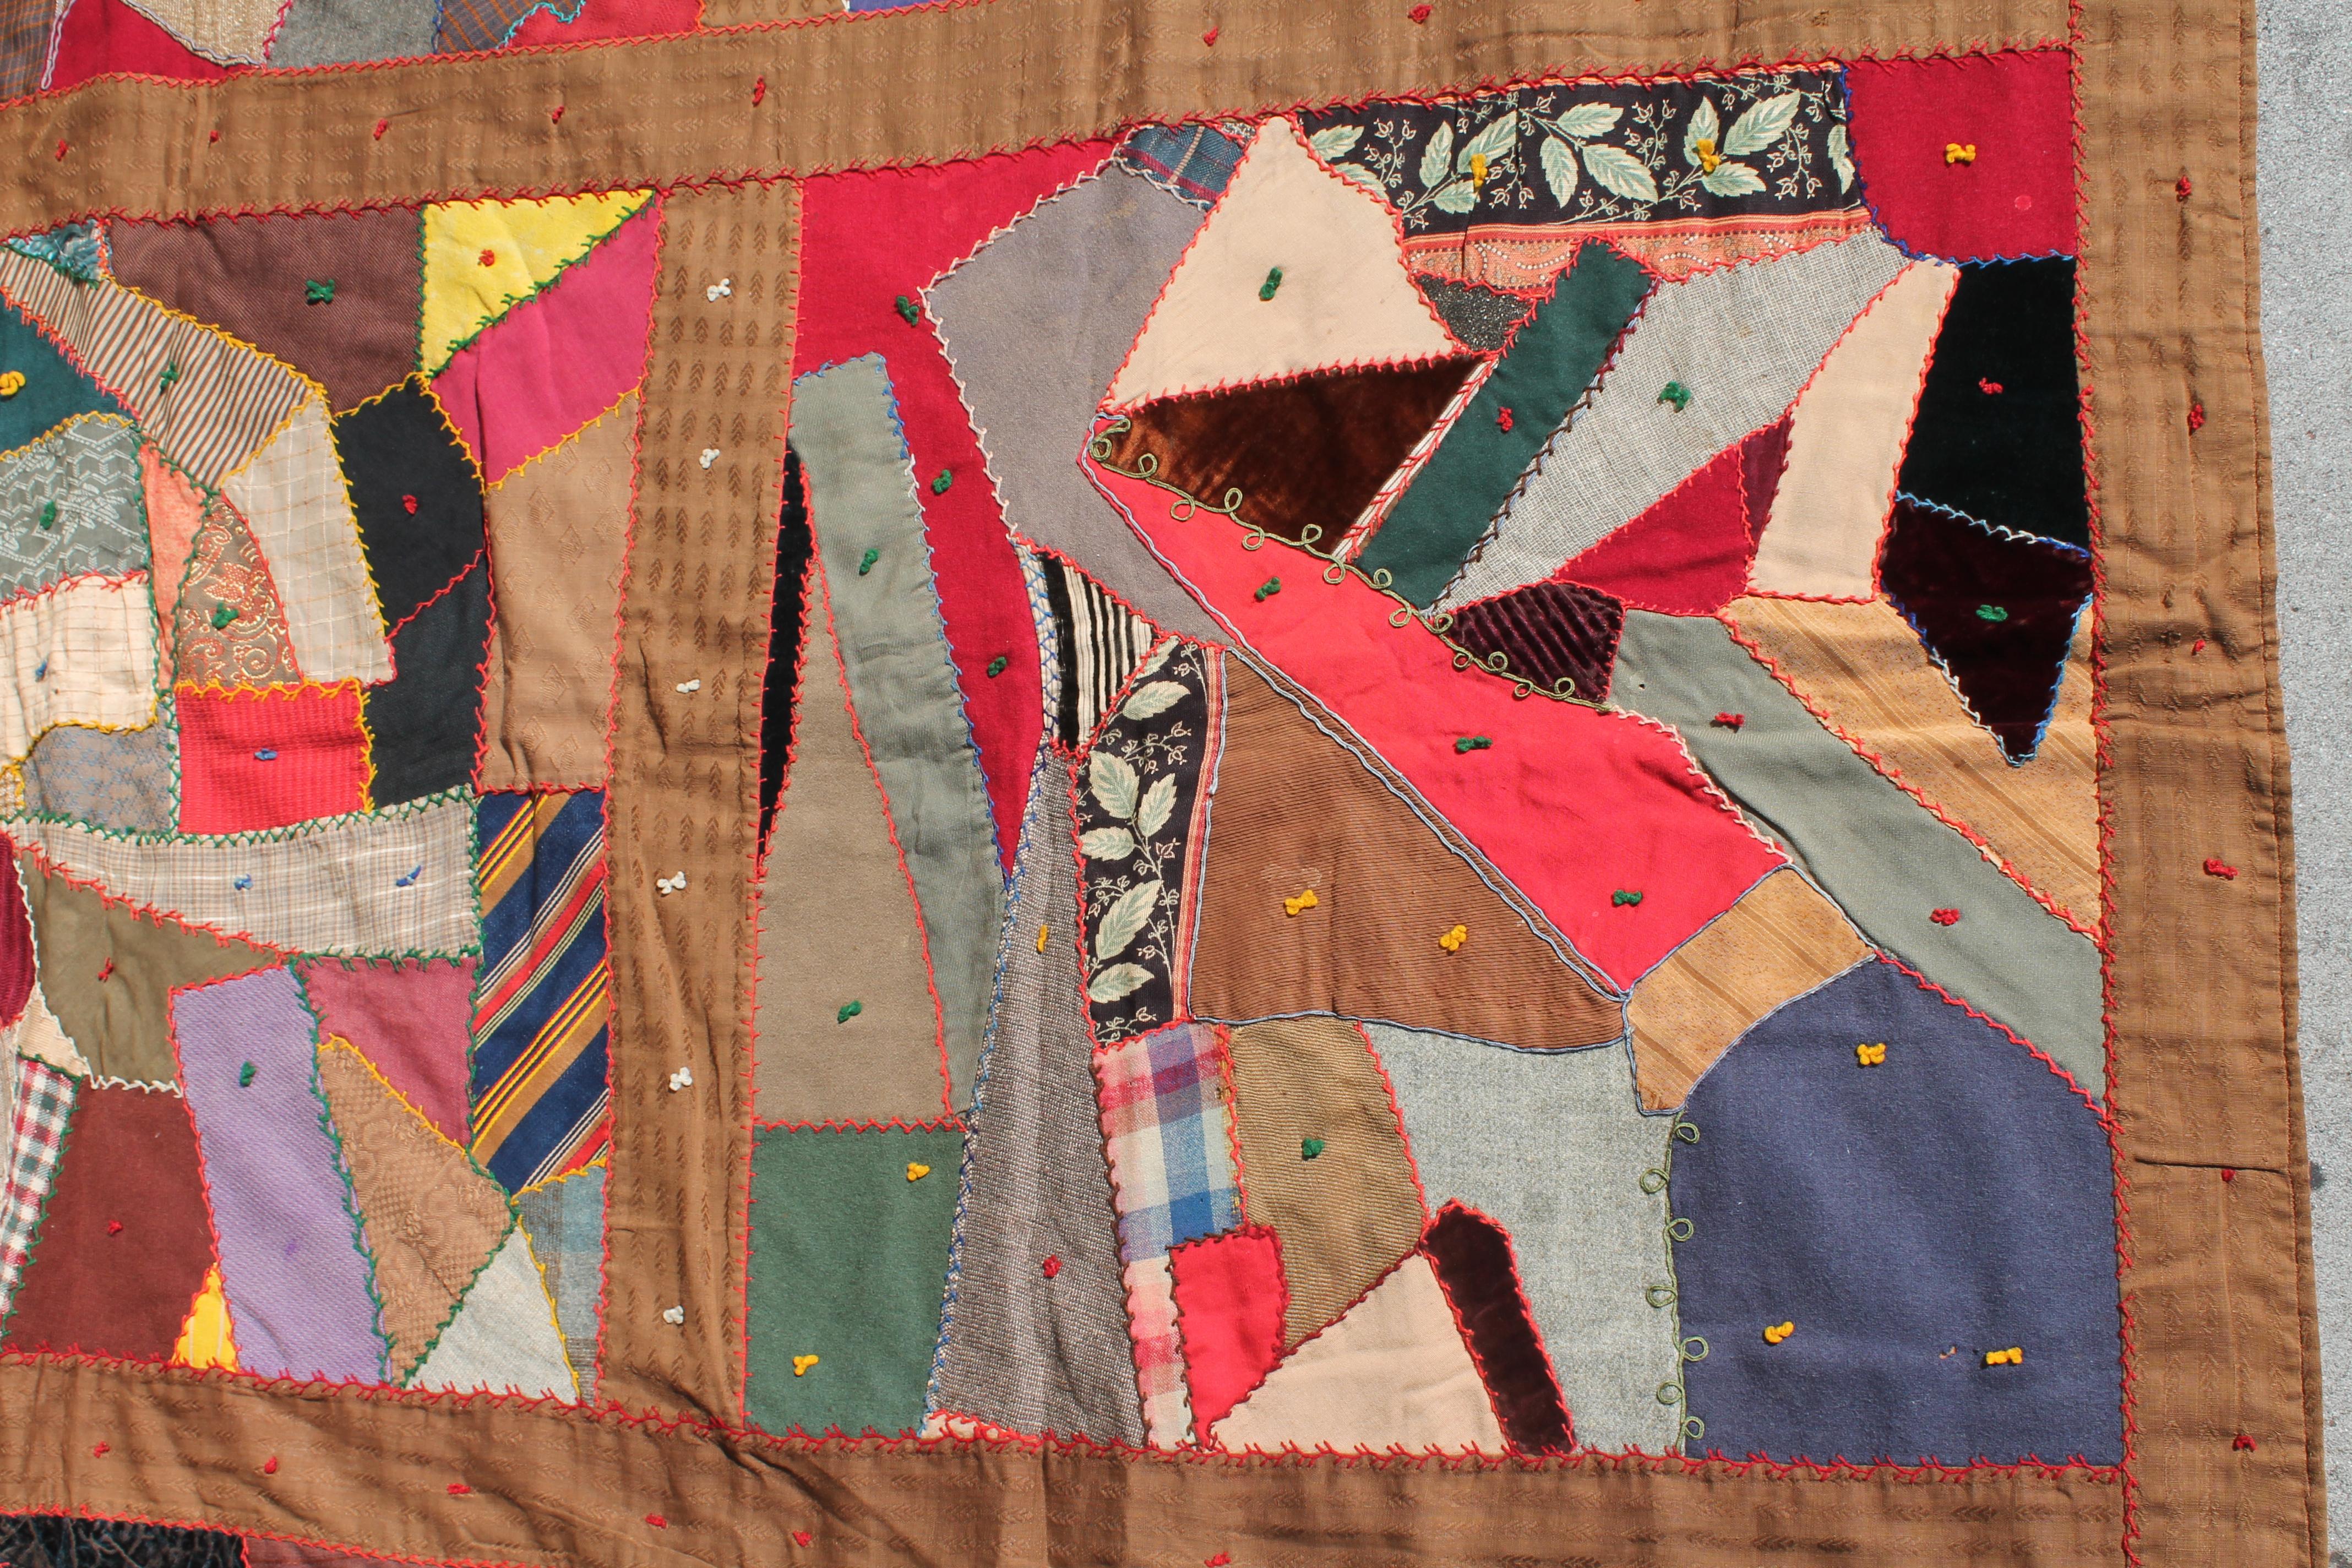 American Antique Quilt, Contained 19th Century Crazy Quilt from Pennsylvania